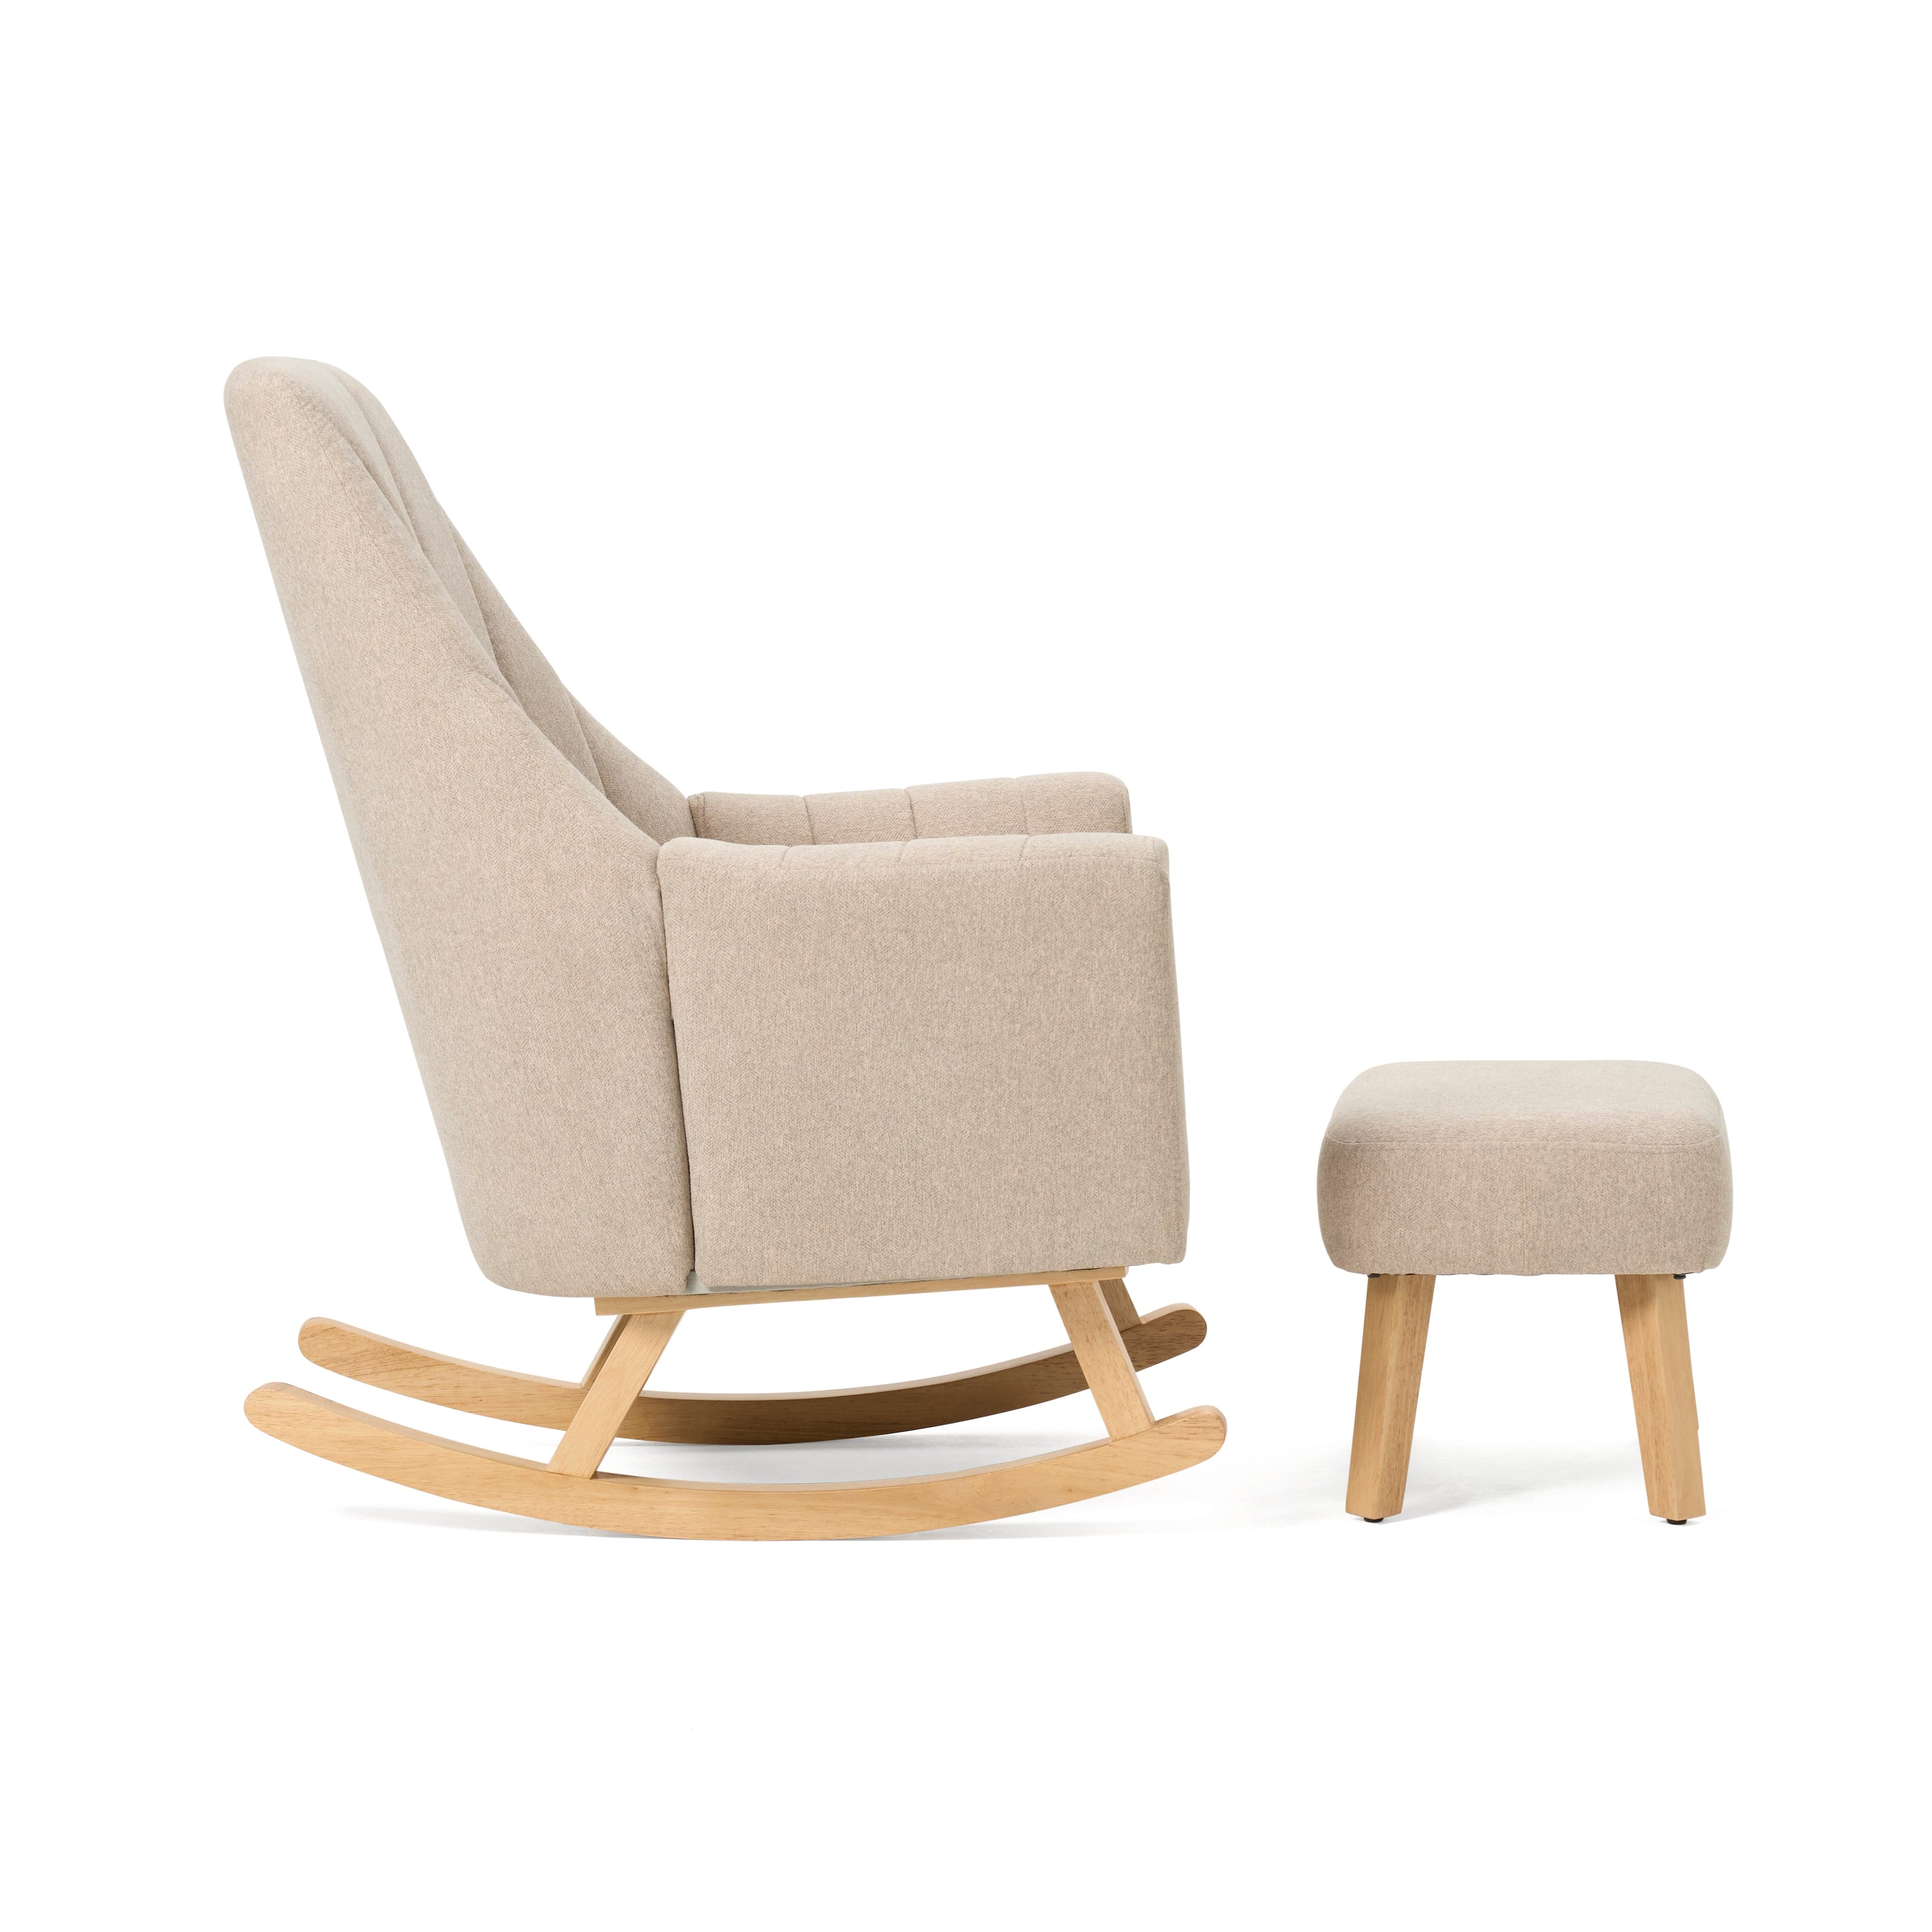 Tutti Bambini Jonah Rocking Chair & Foot Stool - Stone - For Your Little One